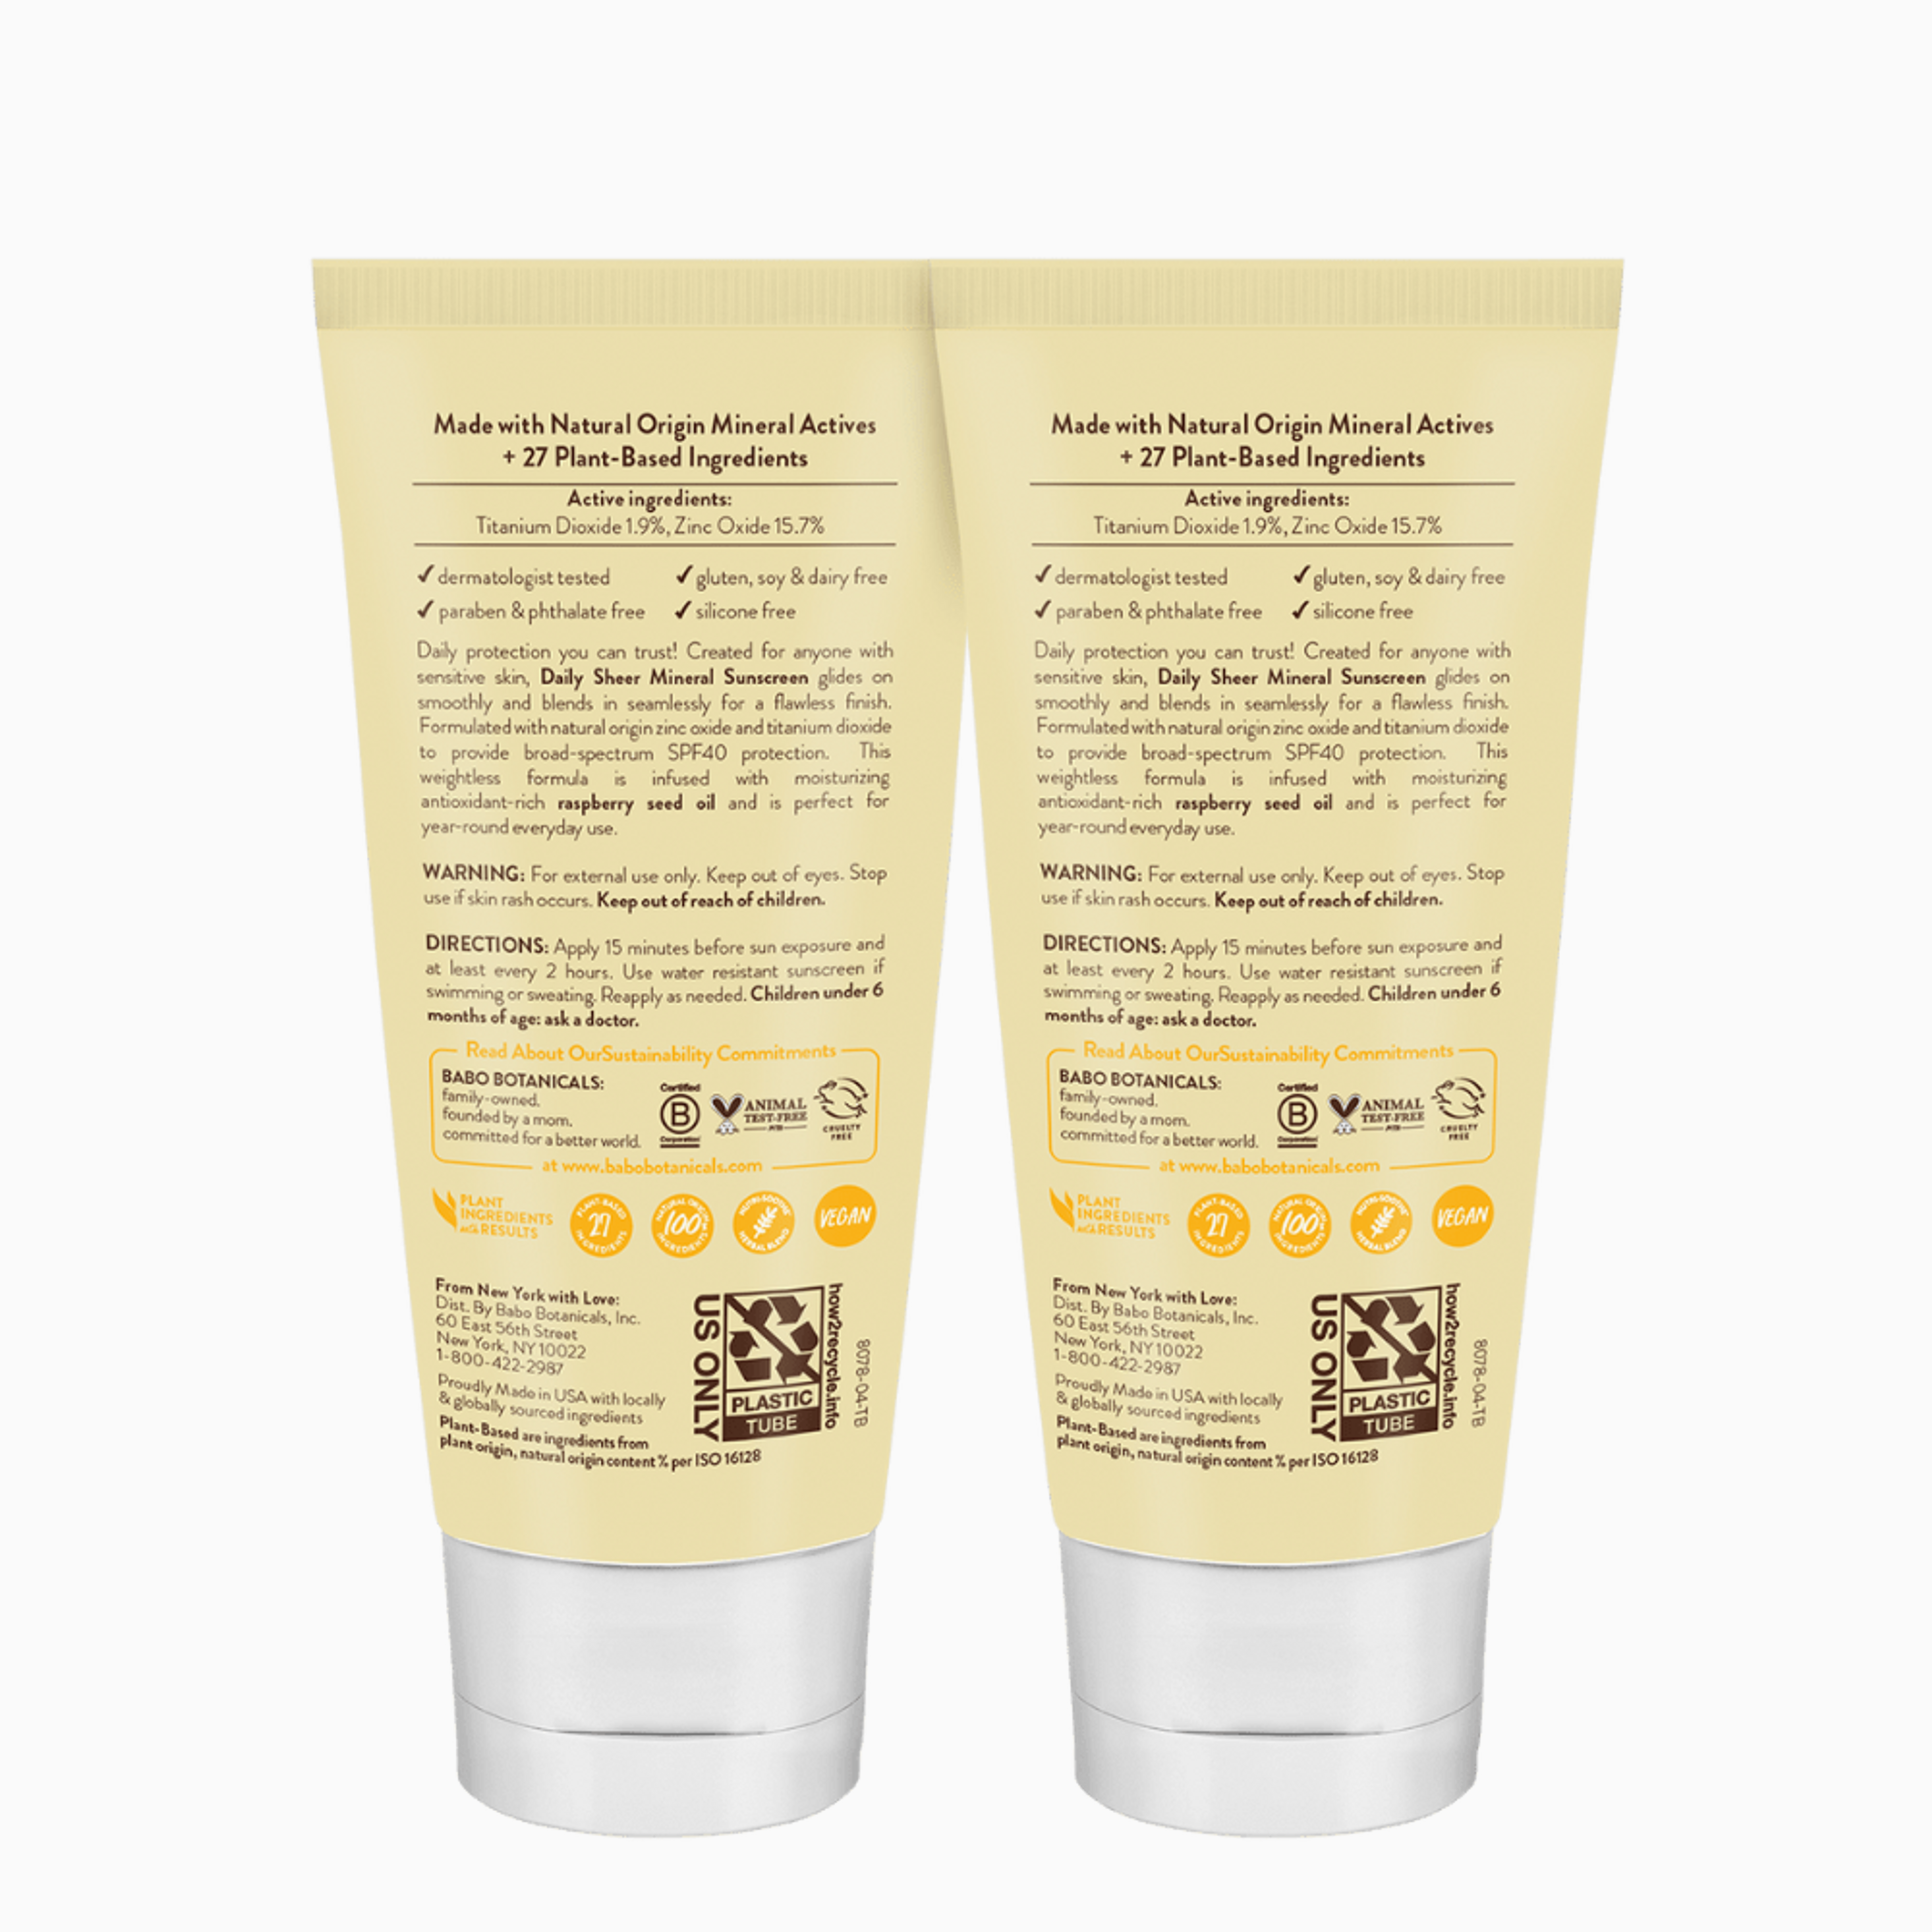 Daily Sheer for Face Fragrance Free Sunscreen Lotion SPF40 Duo